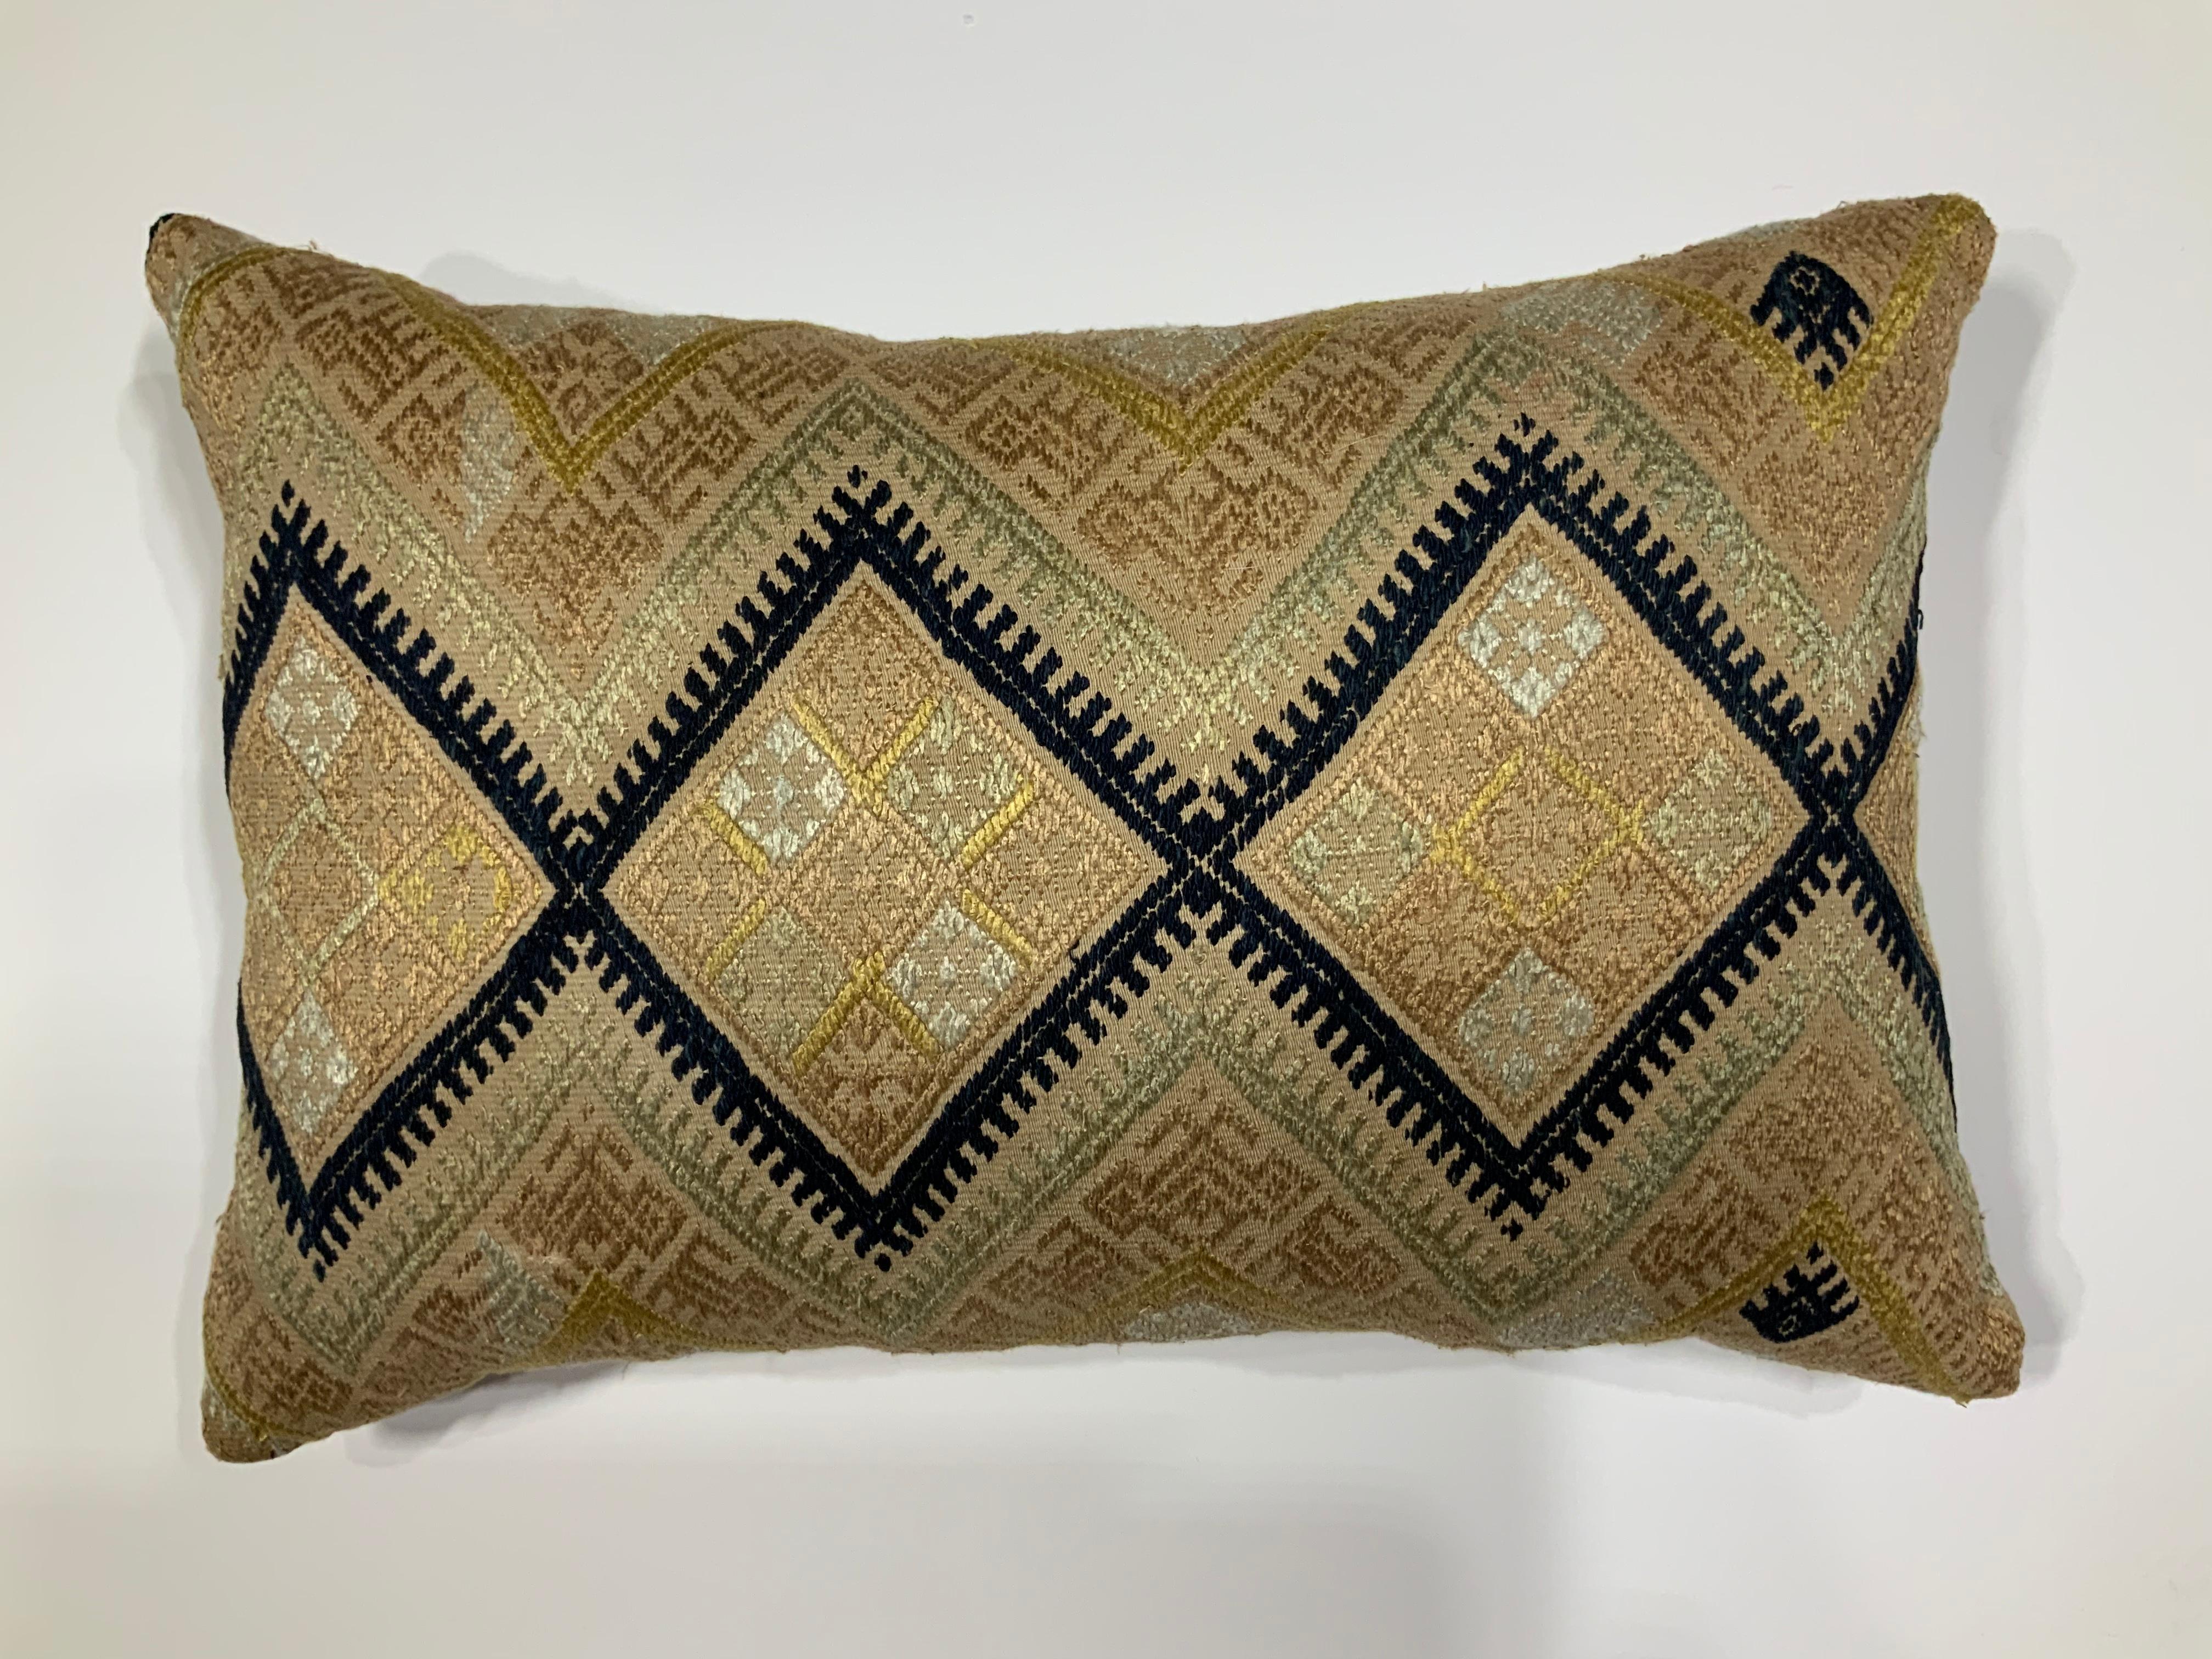 Asian Vintage Hand Embroidery Suzani Pillow